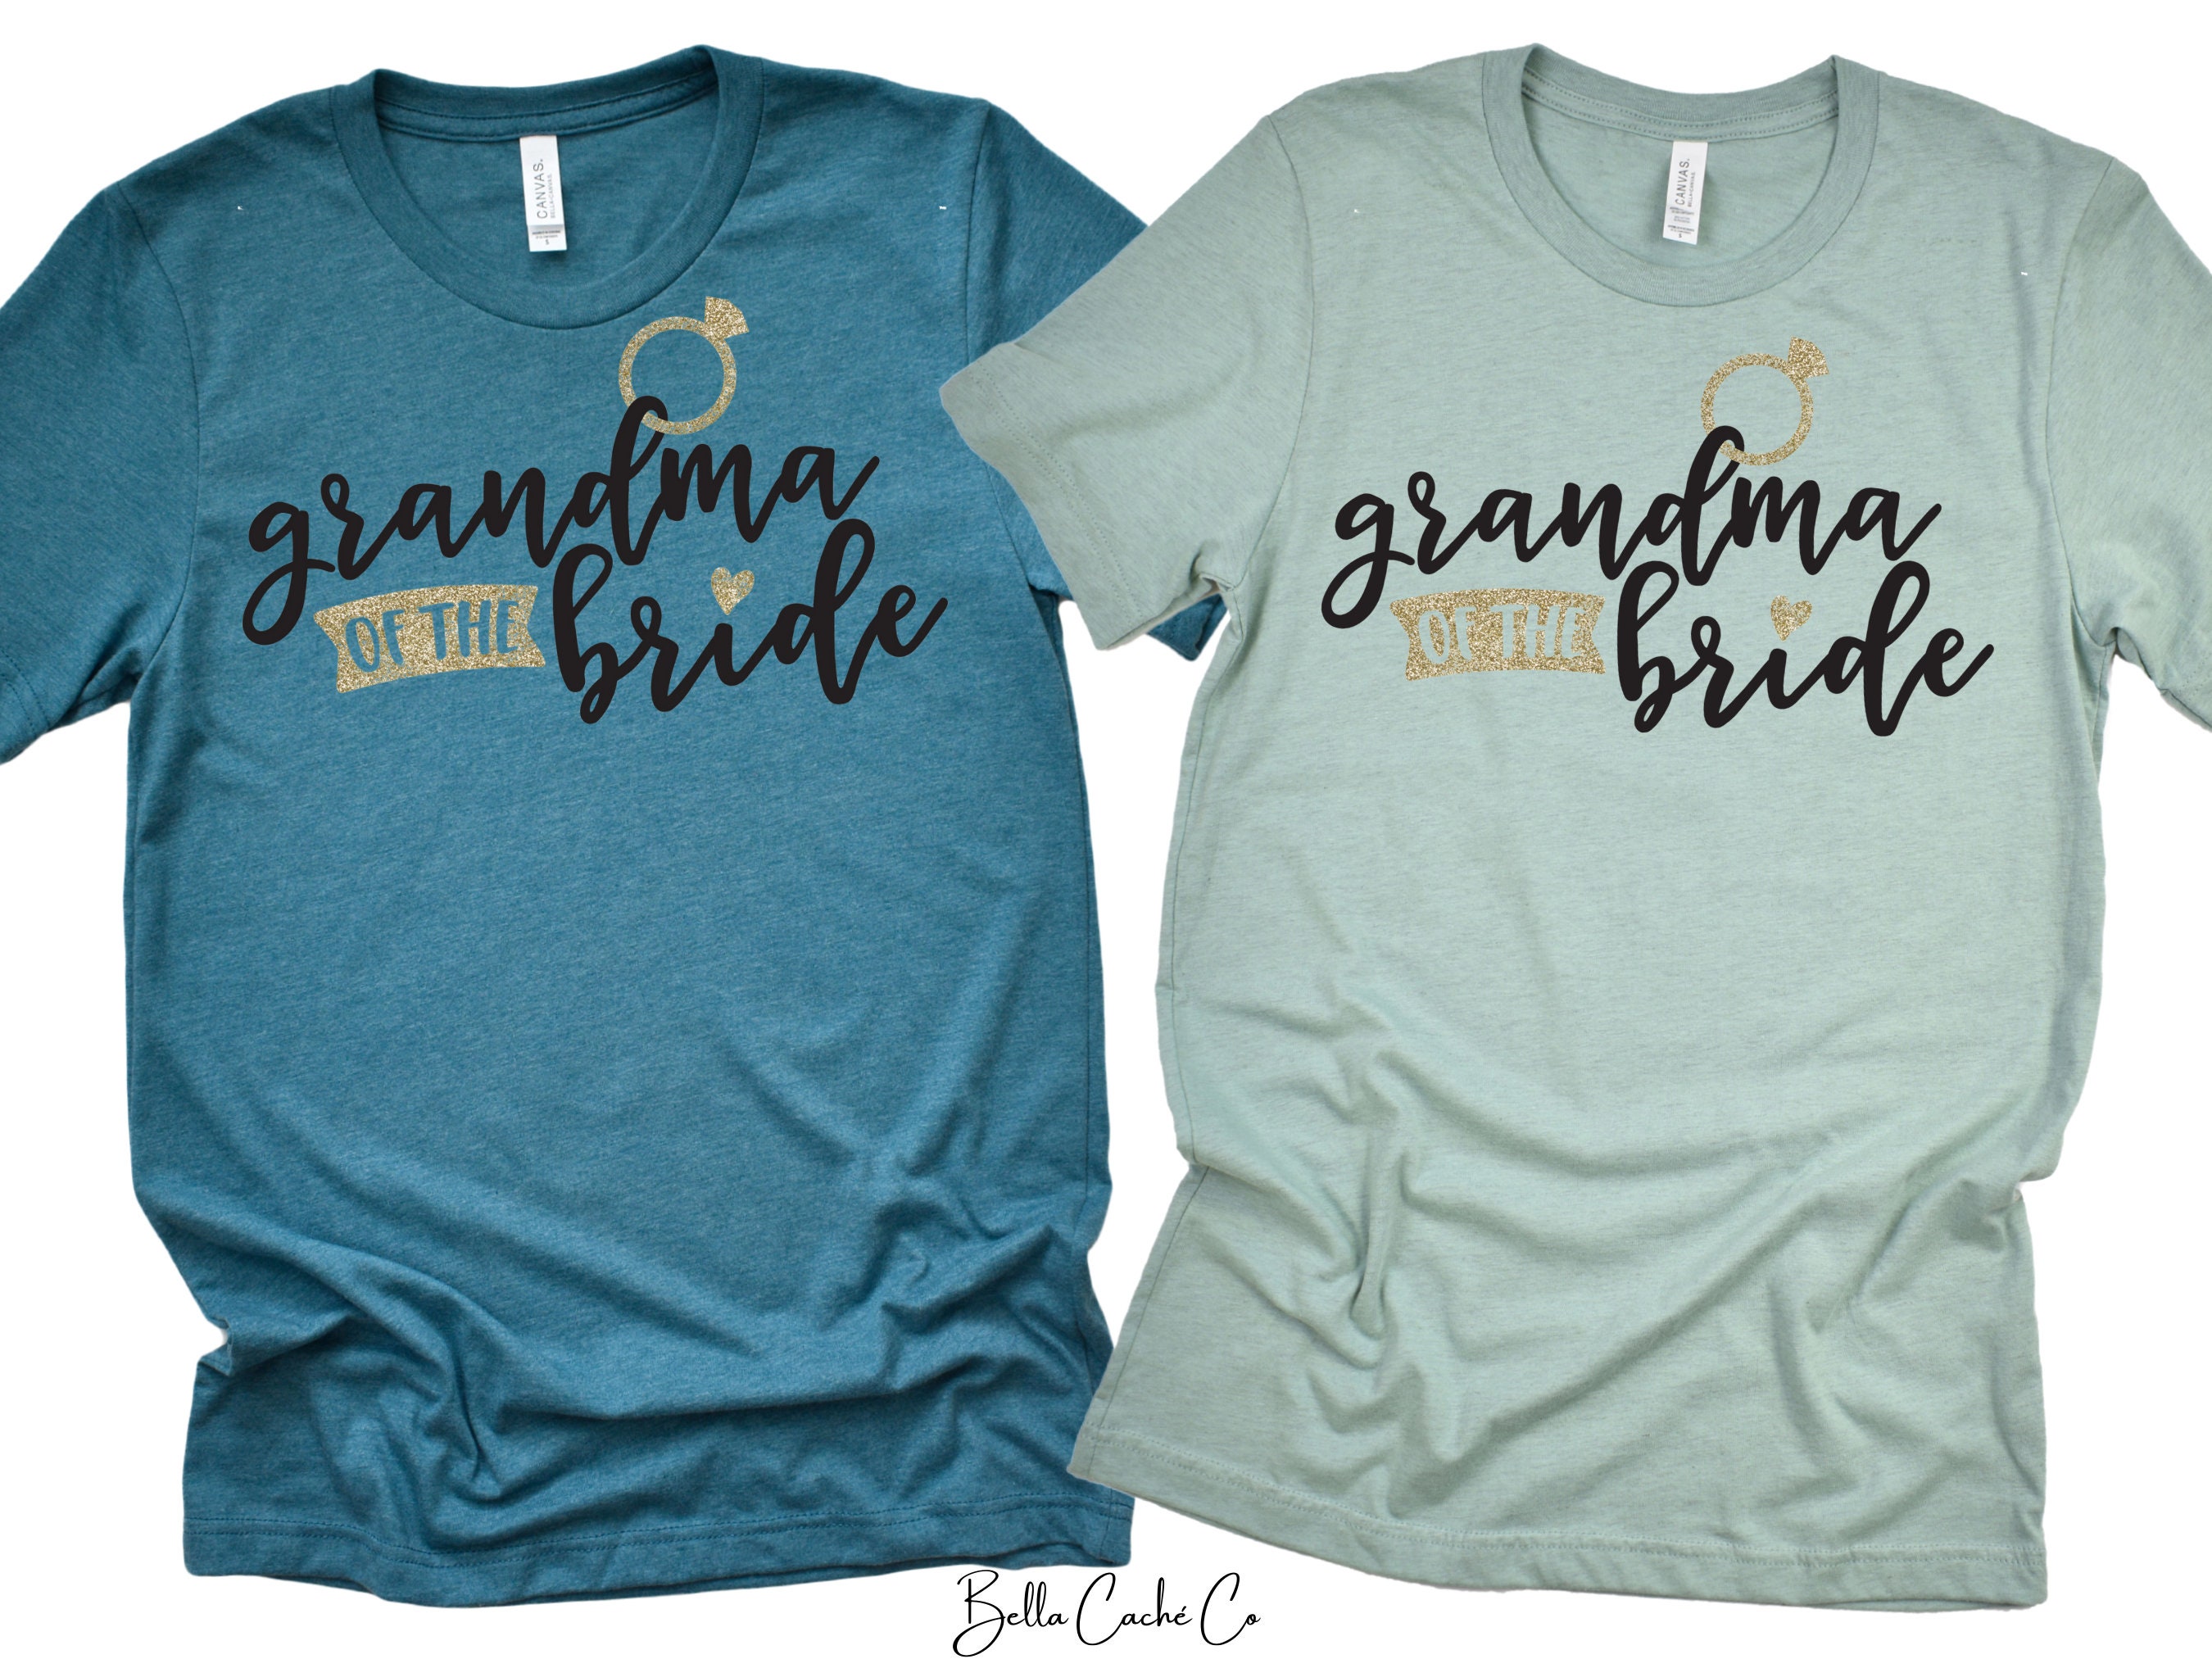 Gift for Her Bachelorette Party Grandma of the Bride Wedding Shirts Bridal Party Shirt Nana of the Bride Shirt Grandmother Bride Shirt